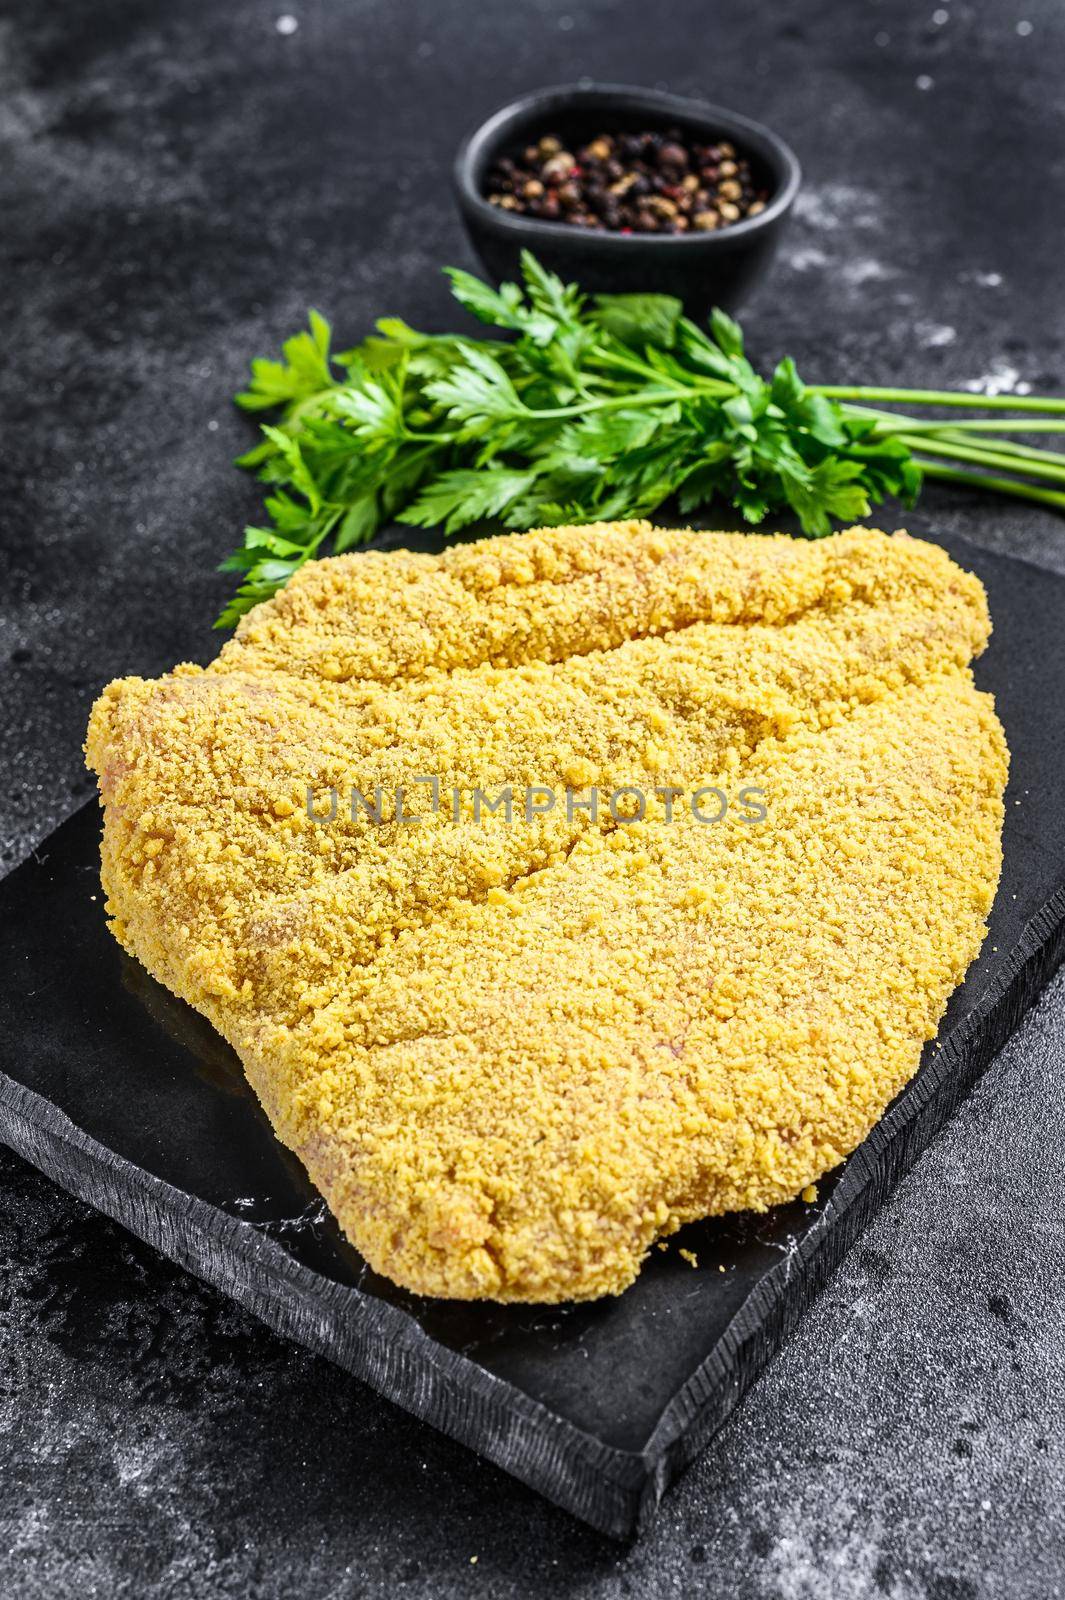 Raw large Viennese schnitzel on a cutting board. Black background. Top view.